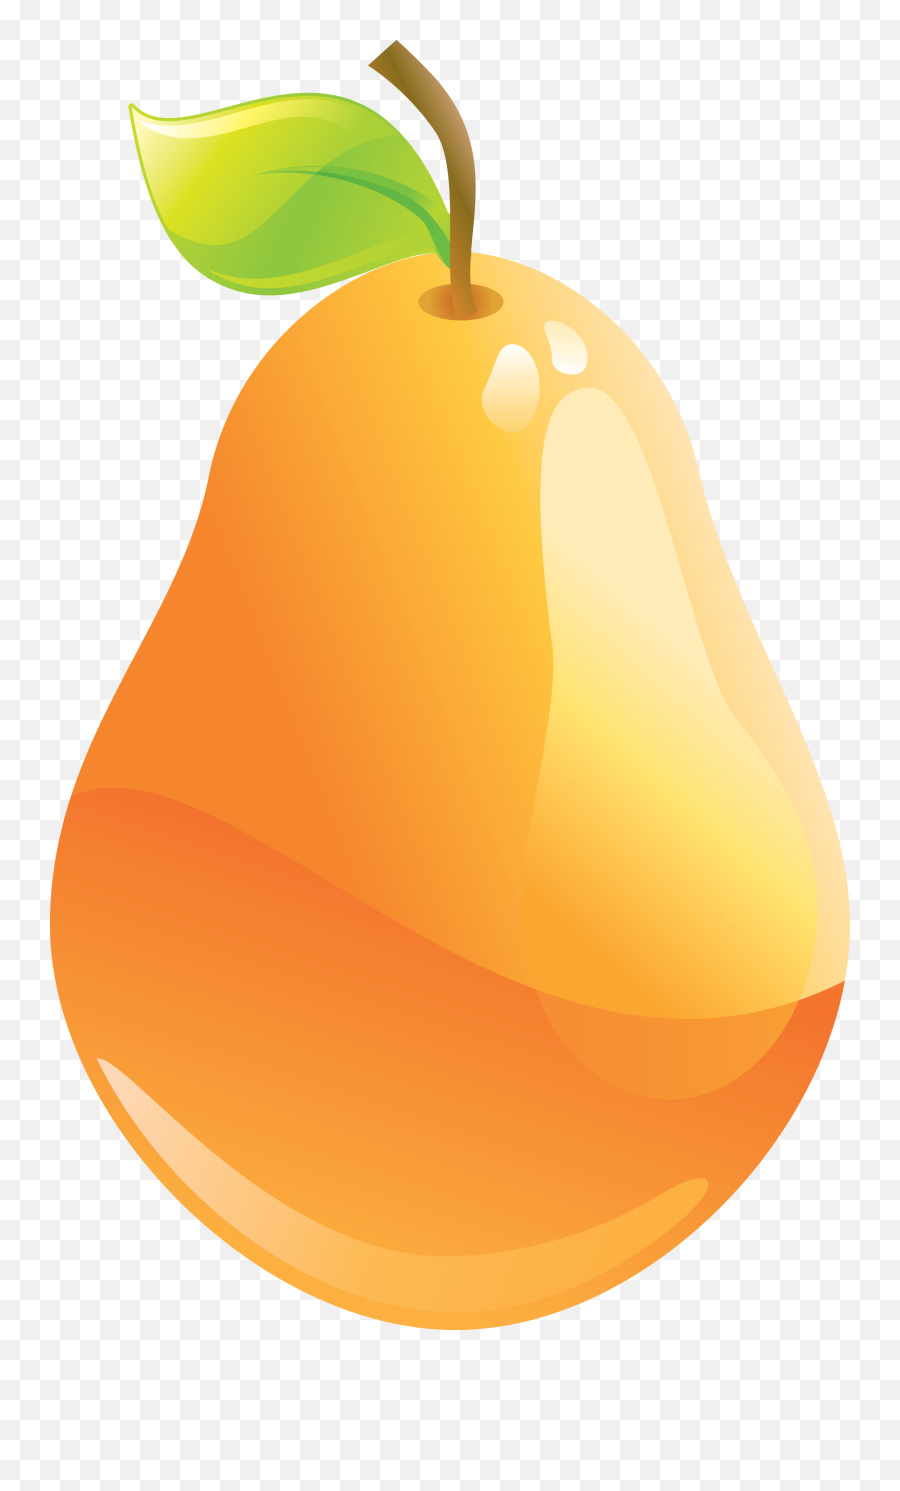 Orange Cantaloupe Png Hd Best Free Melon Icon - Photo Cartoon Fruit And Vegetables,Cantaloupe Png